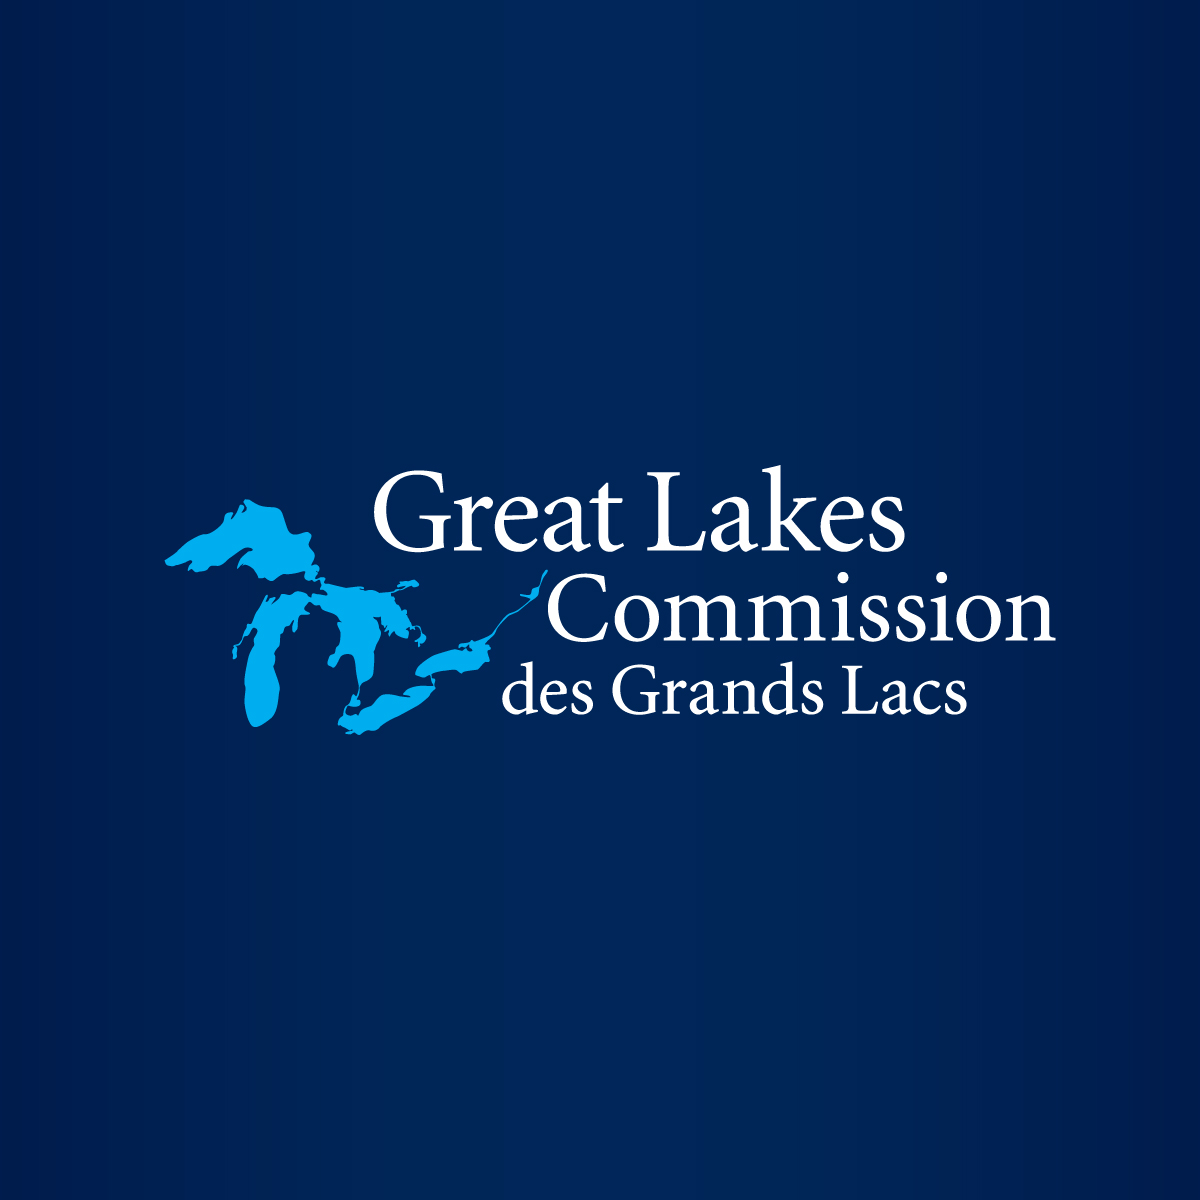 tributaries play key role in feeding forever chemicals into great lakes study